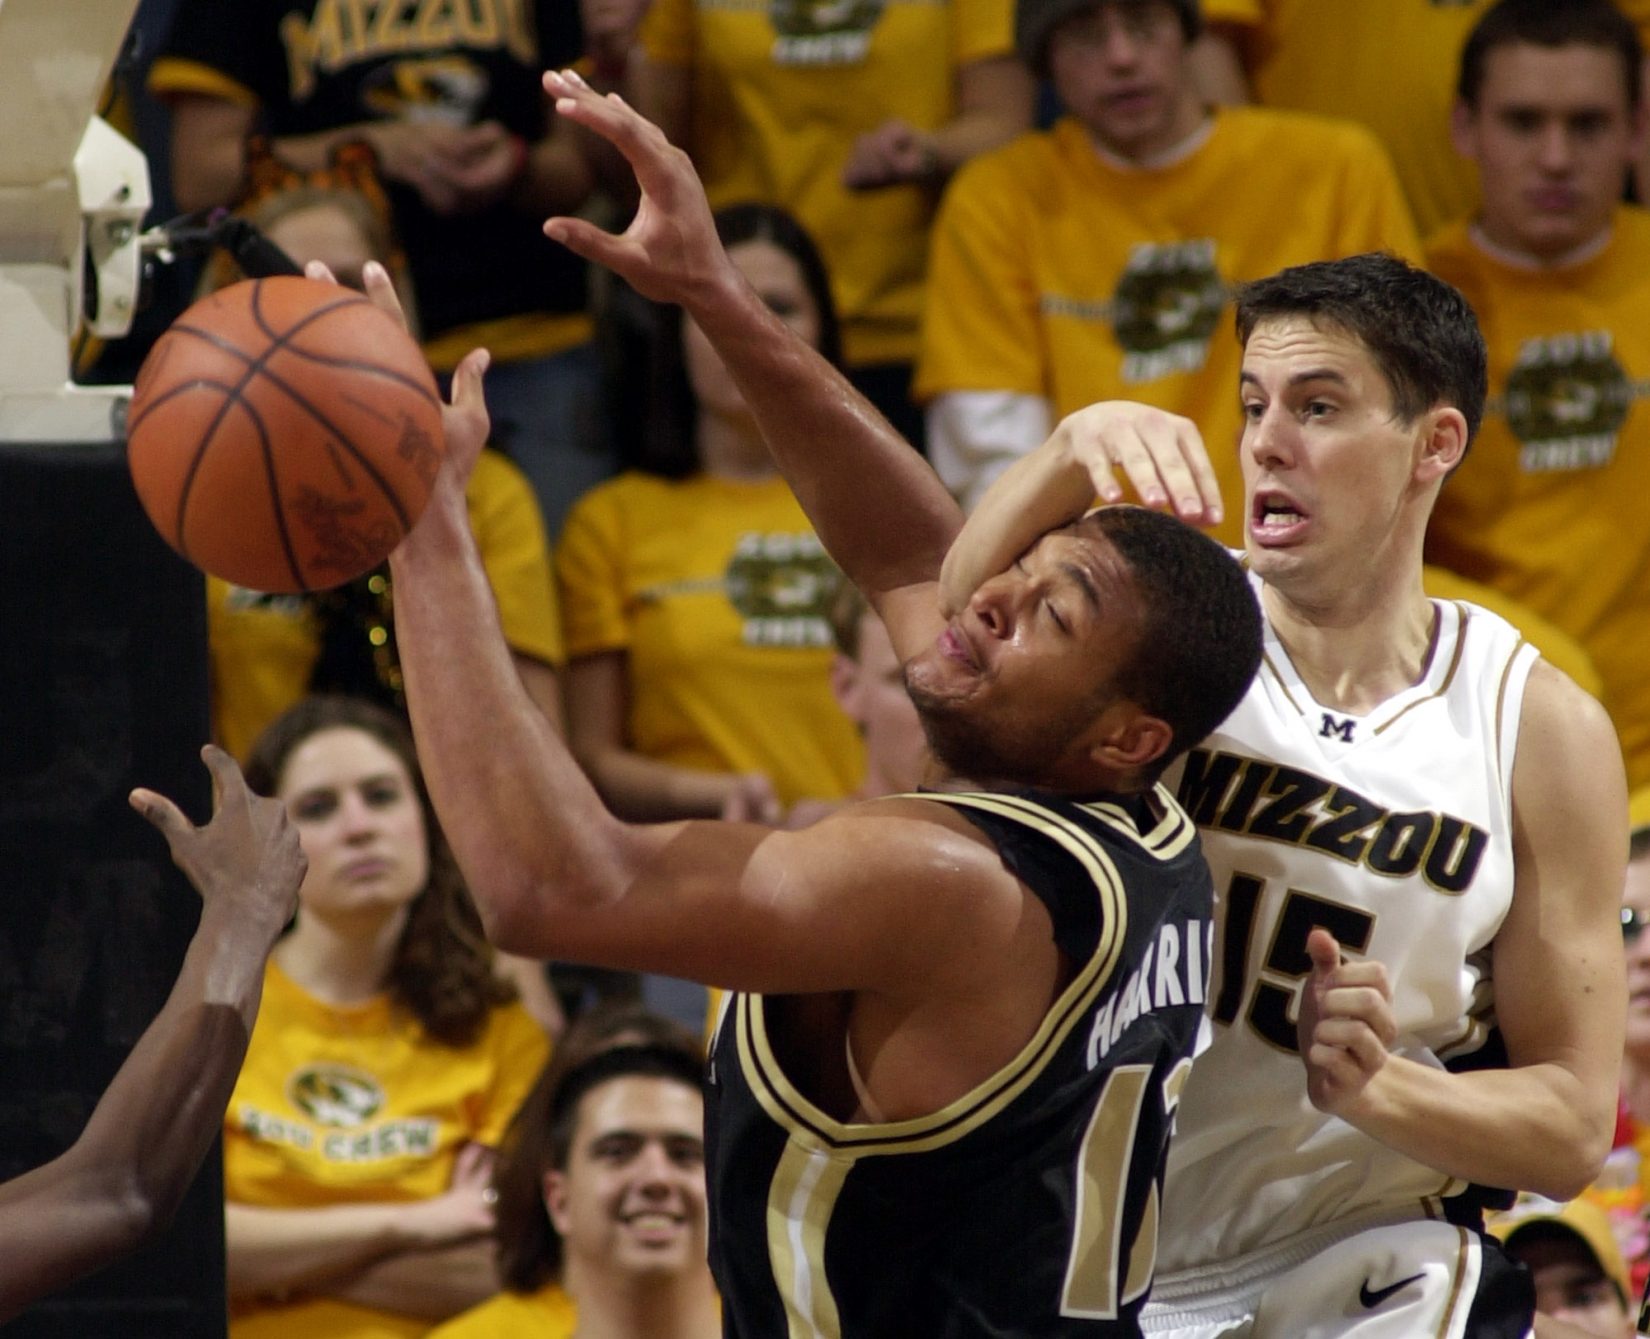 In this 2003 file photo, Missouri's Josh Kroenke, right, smacks Colorado's David Harrison, left, in the head as they battle for a rebound. (AP Photo/L.G. Patterson)